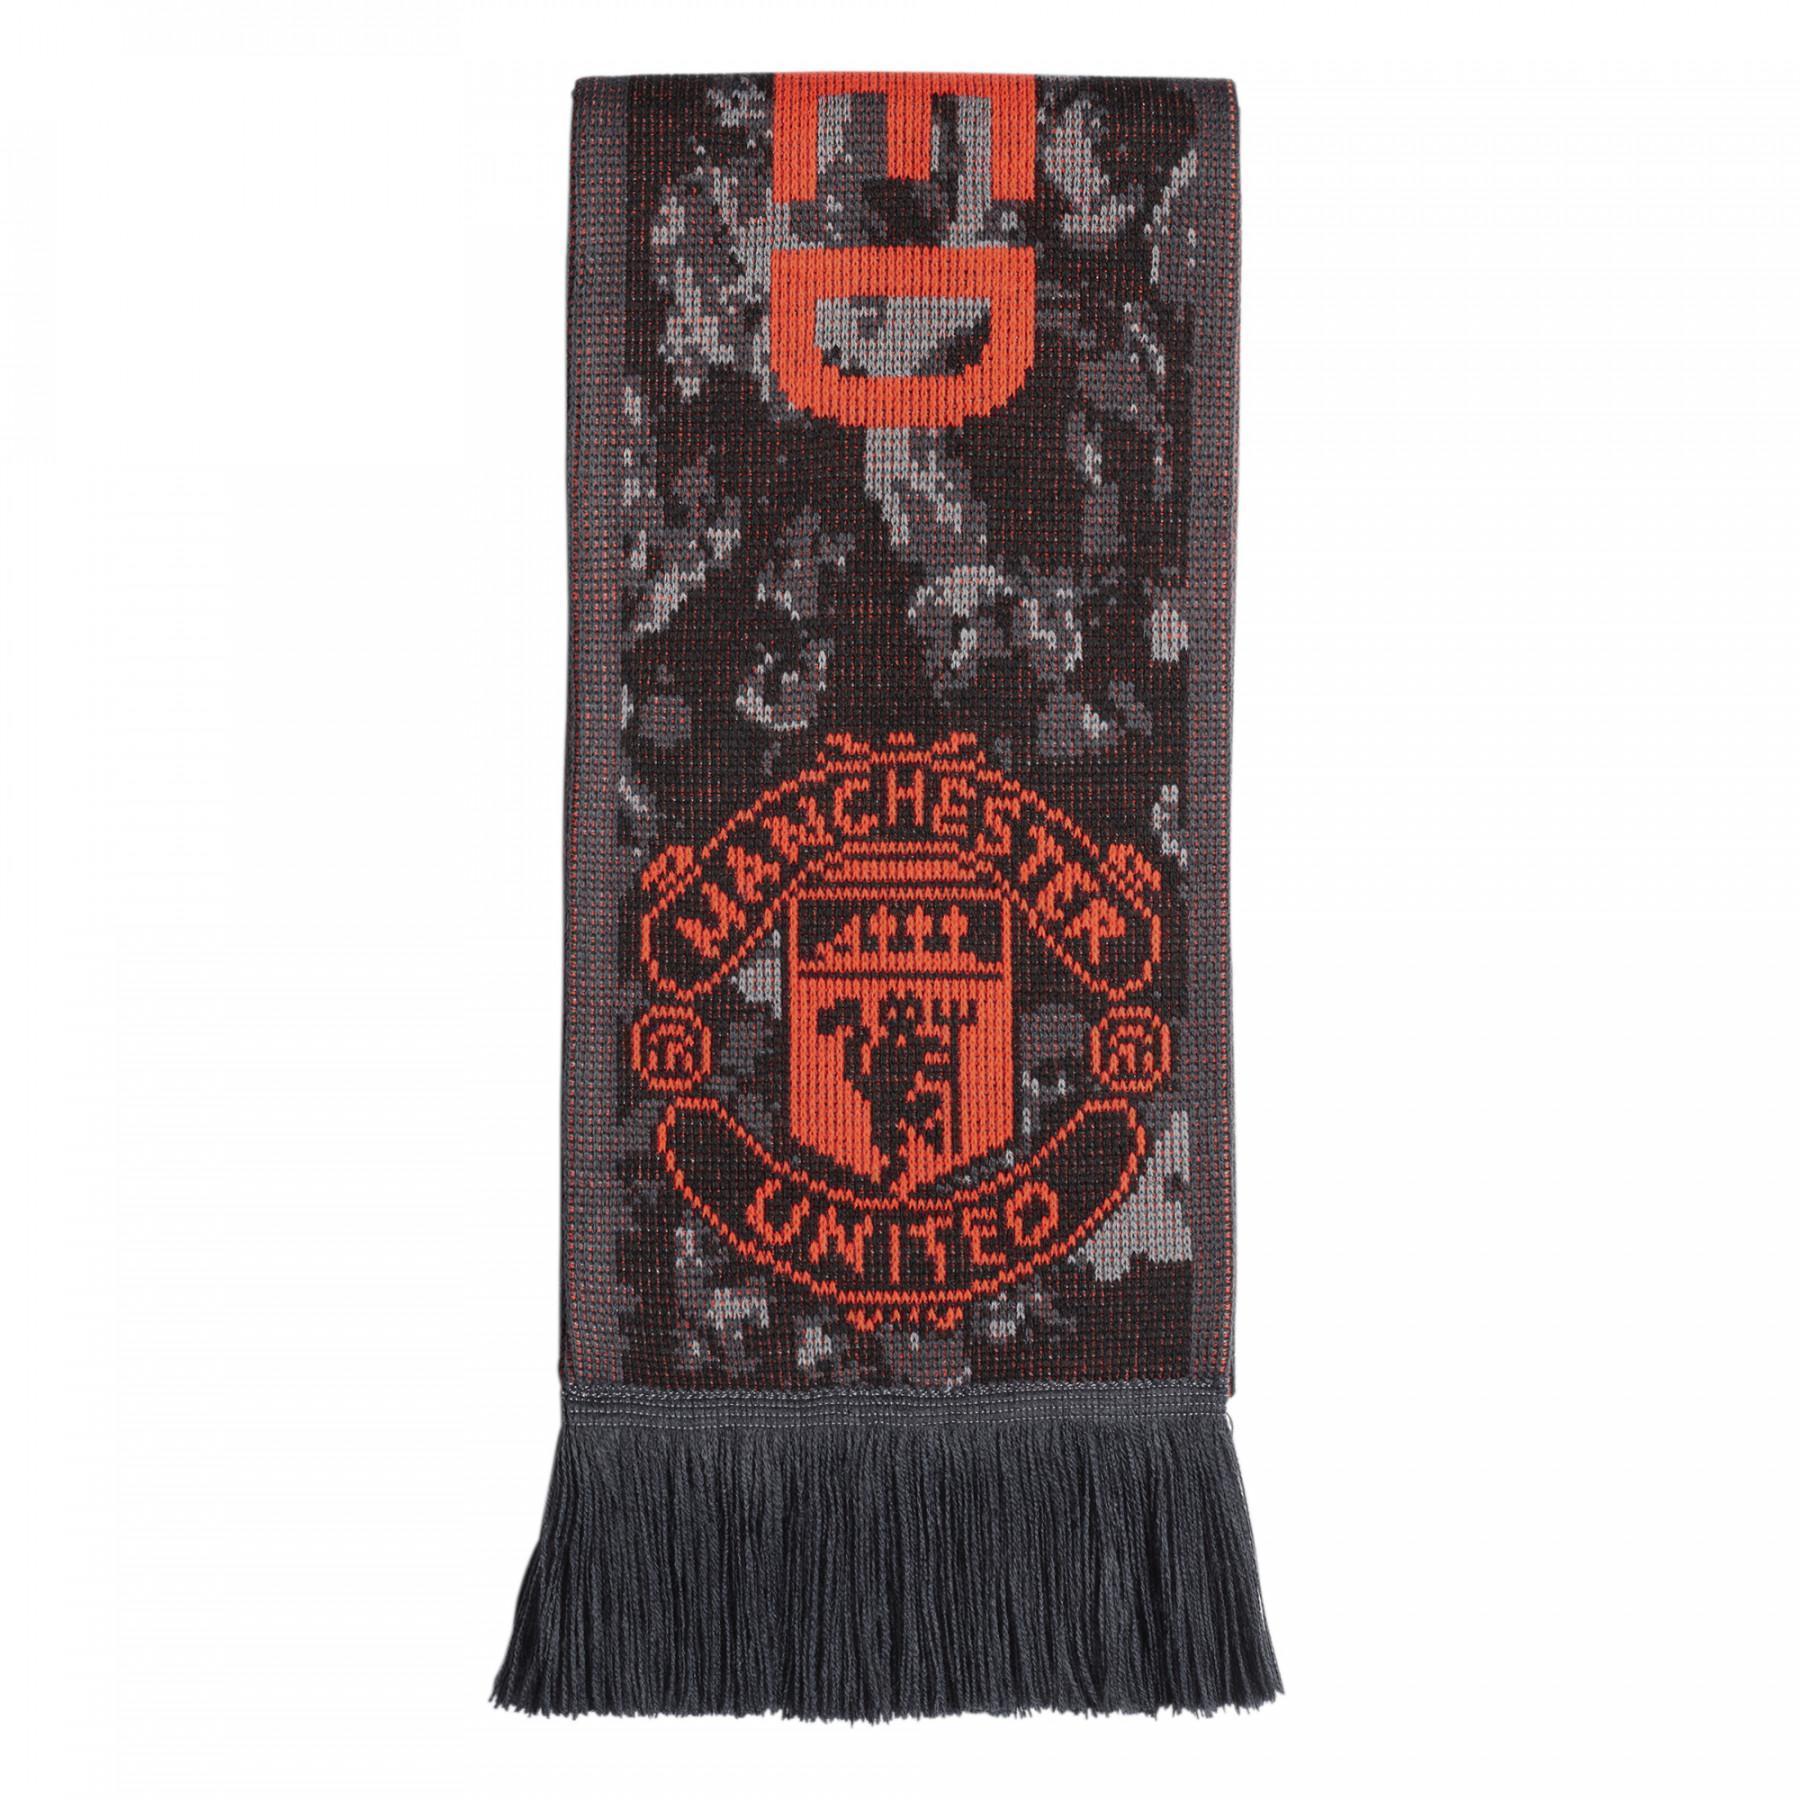 scarf Manchester United